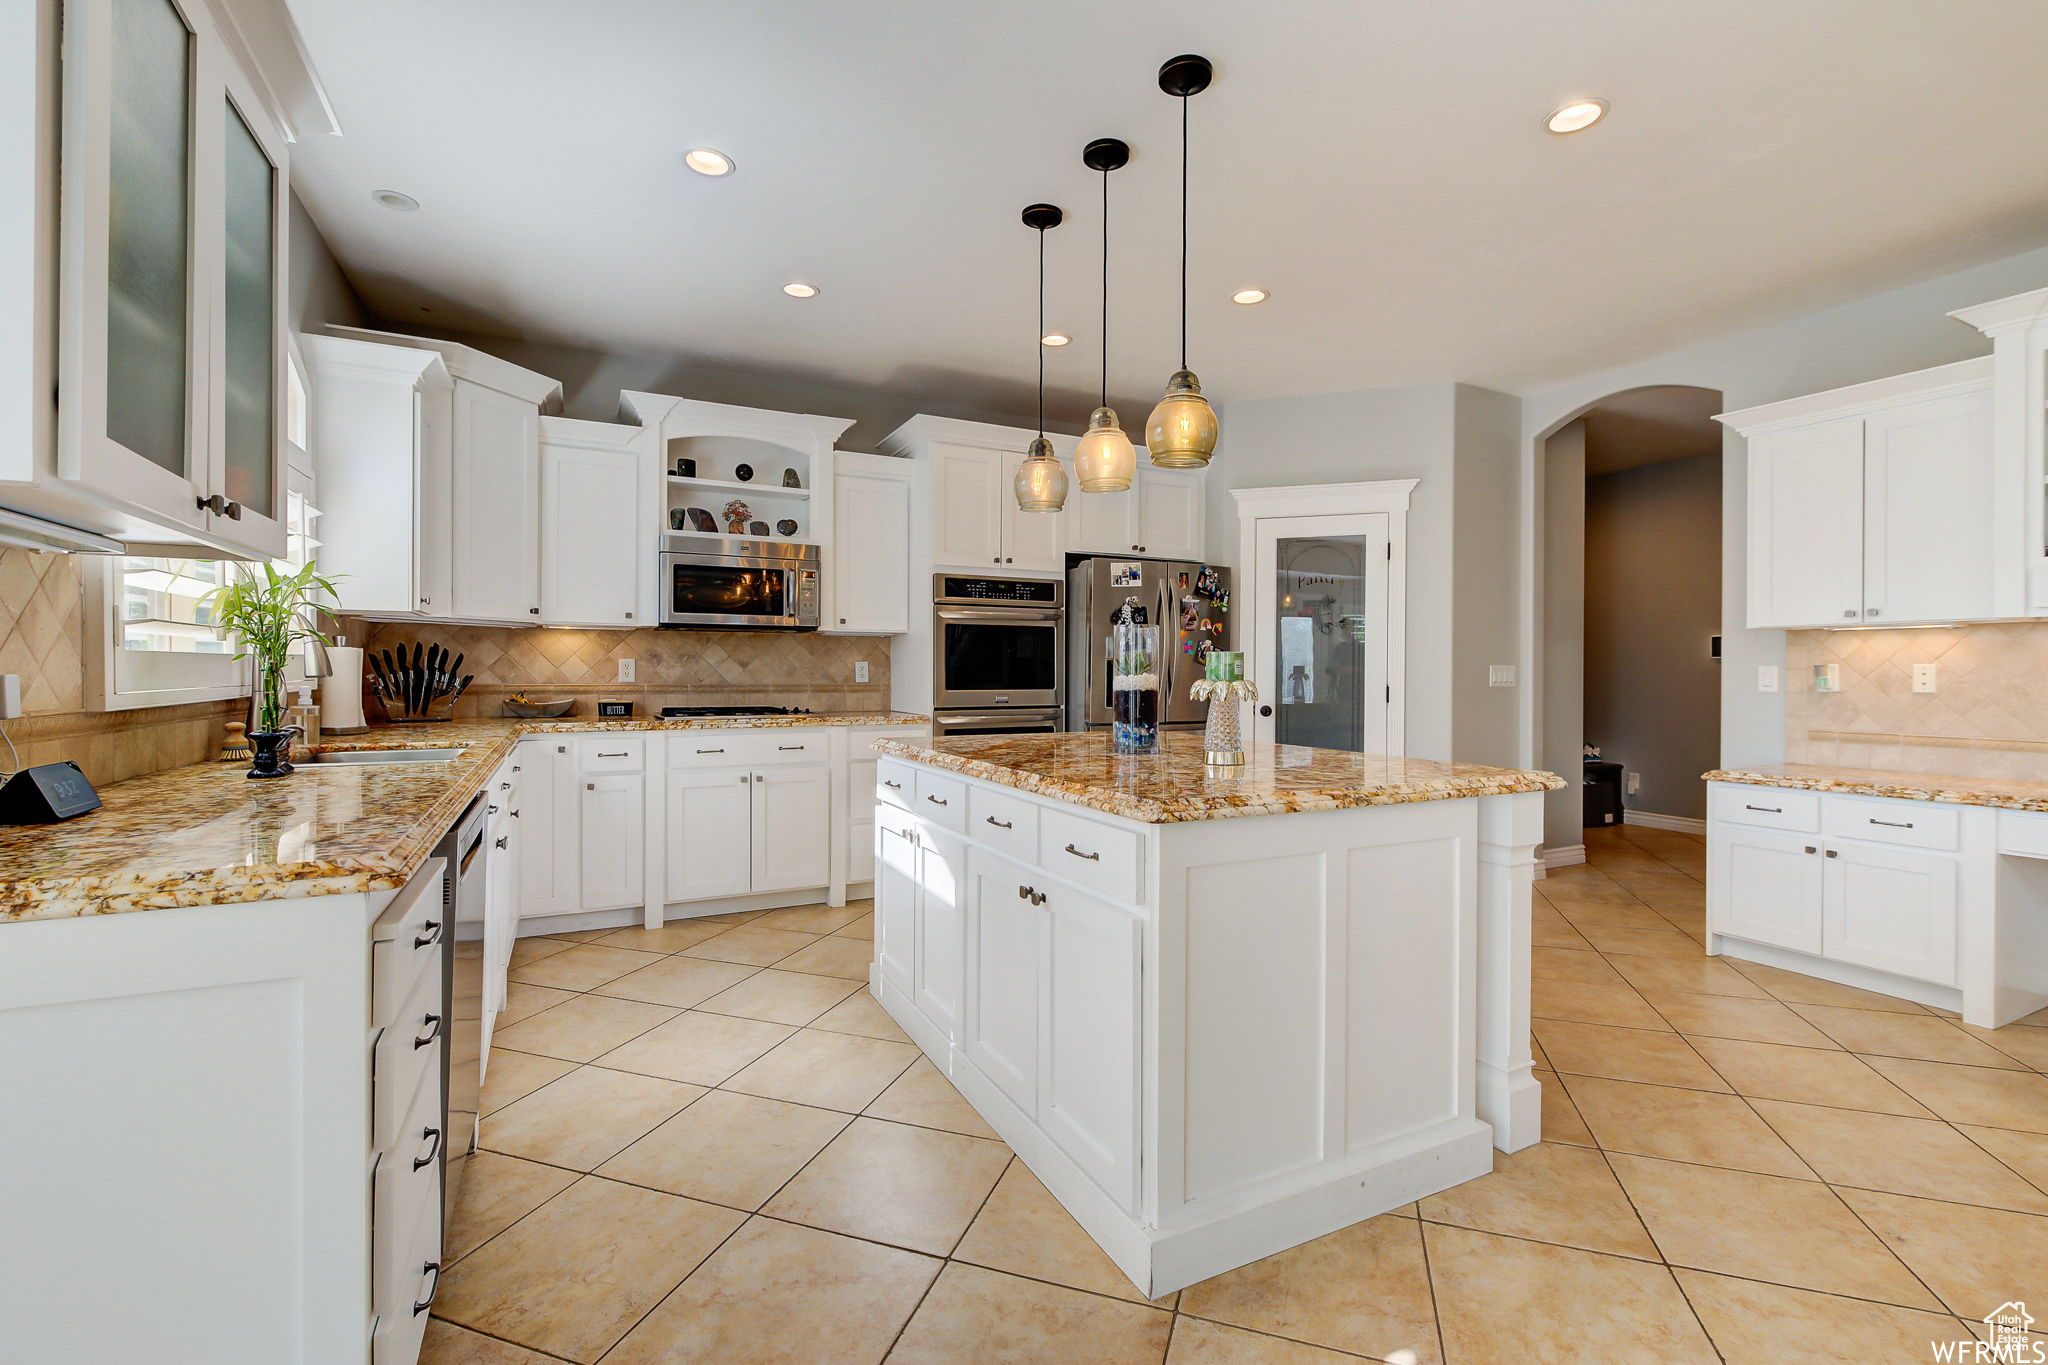 Kitchen featuring pendant lighting, white cabinets, tasteful backsplash, appliances with stainless steel finishes, and a center island